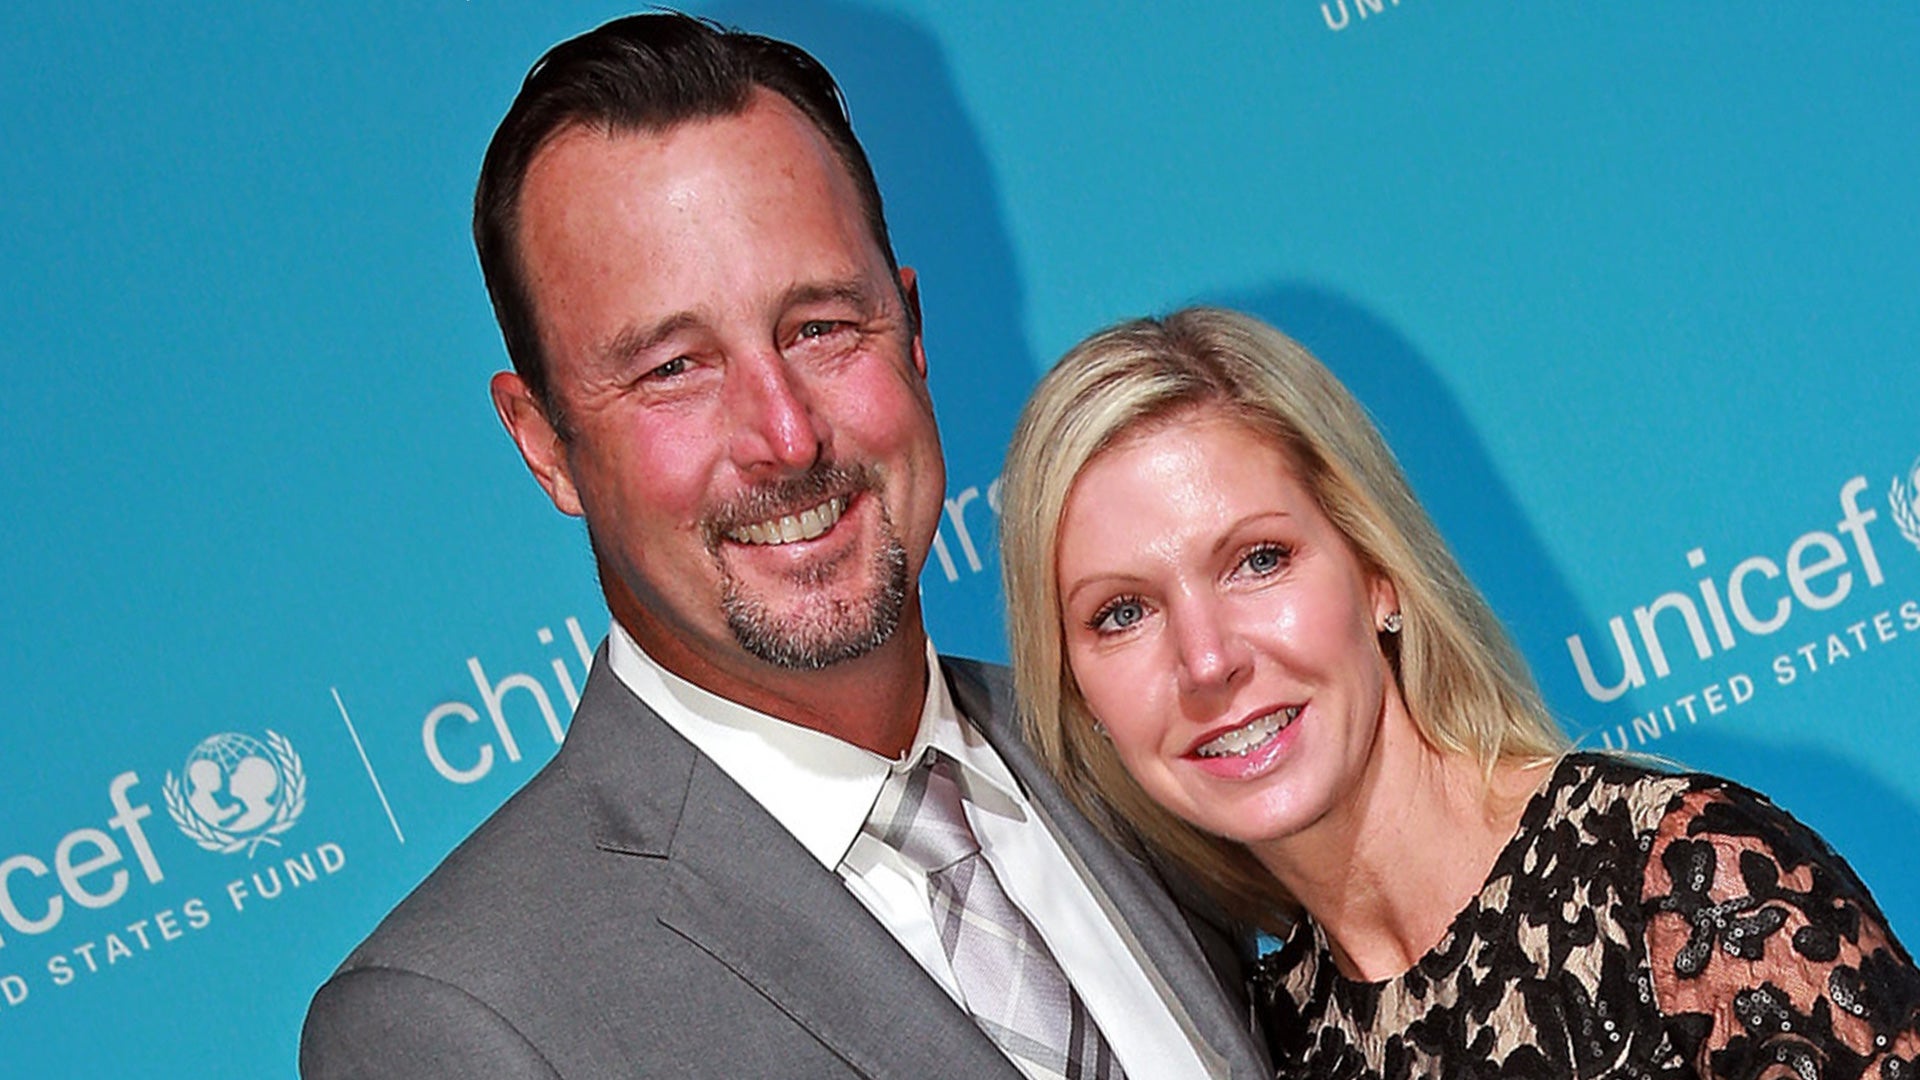 Stacy Wakefield, Late Red Sox Pitcher Tim Wakefield's Wife, Dies at 53